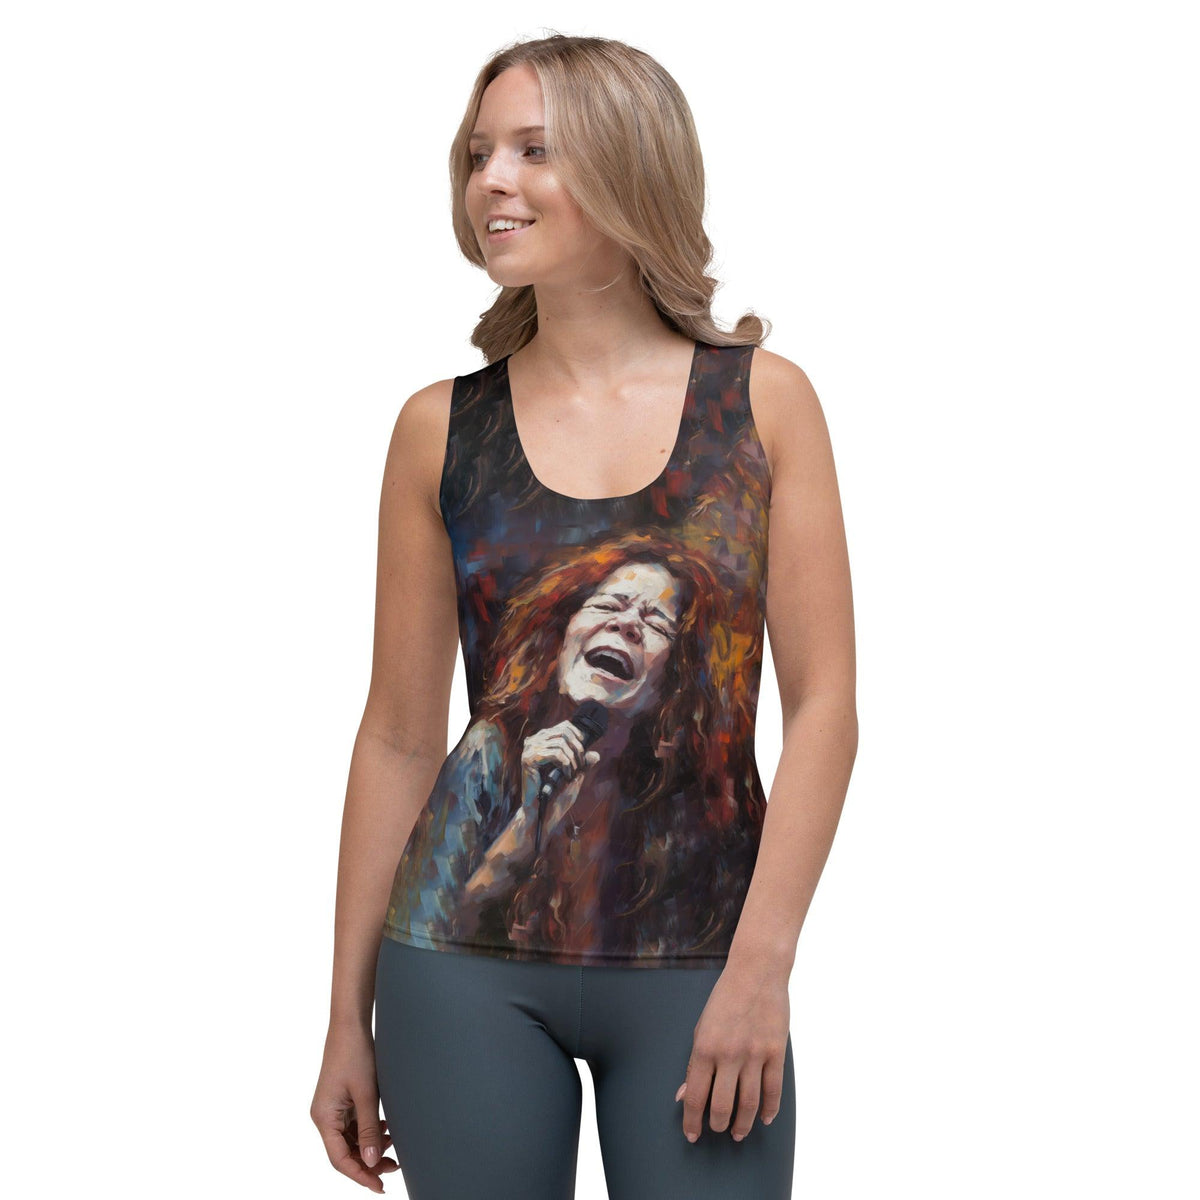 Melodic Madness vibrant sublimation tank top on model.